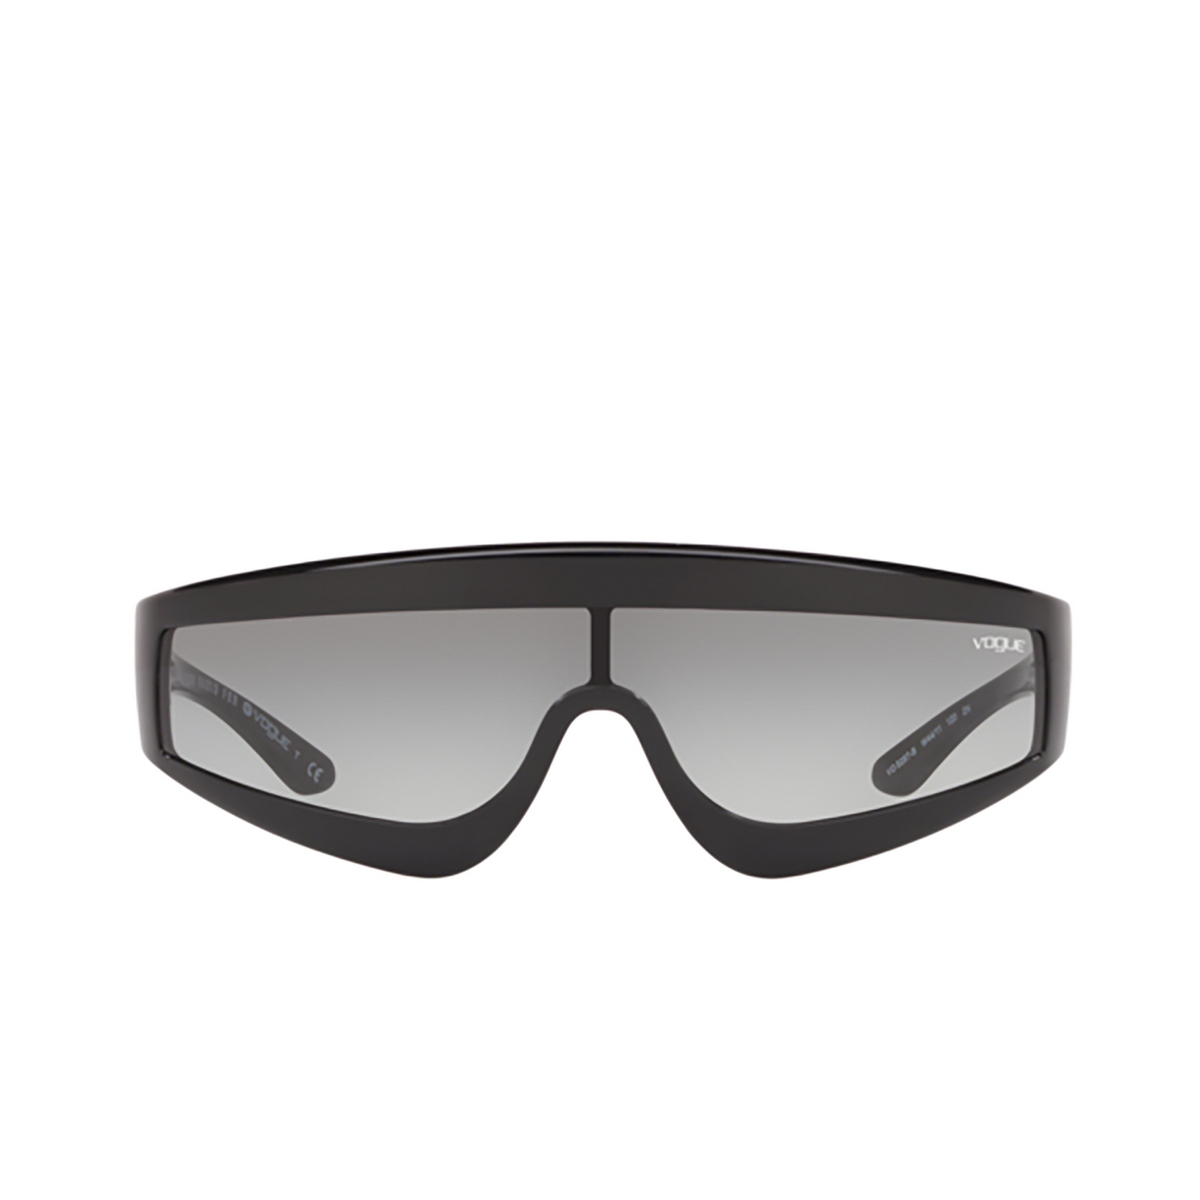 Vogue ZOOM-IN Sunglasses W44/11 Black - front view